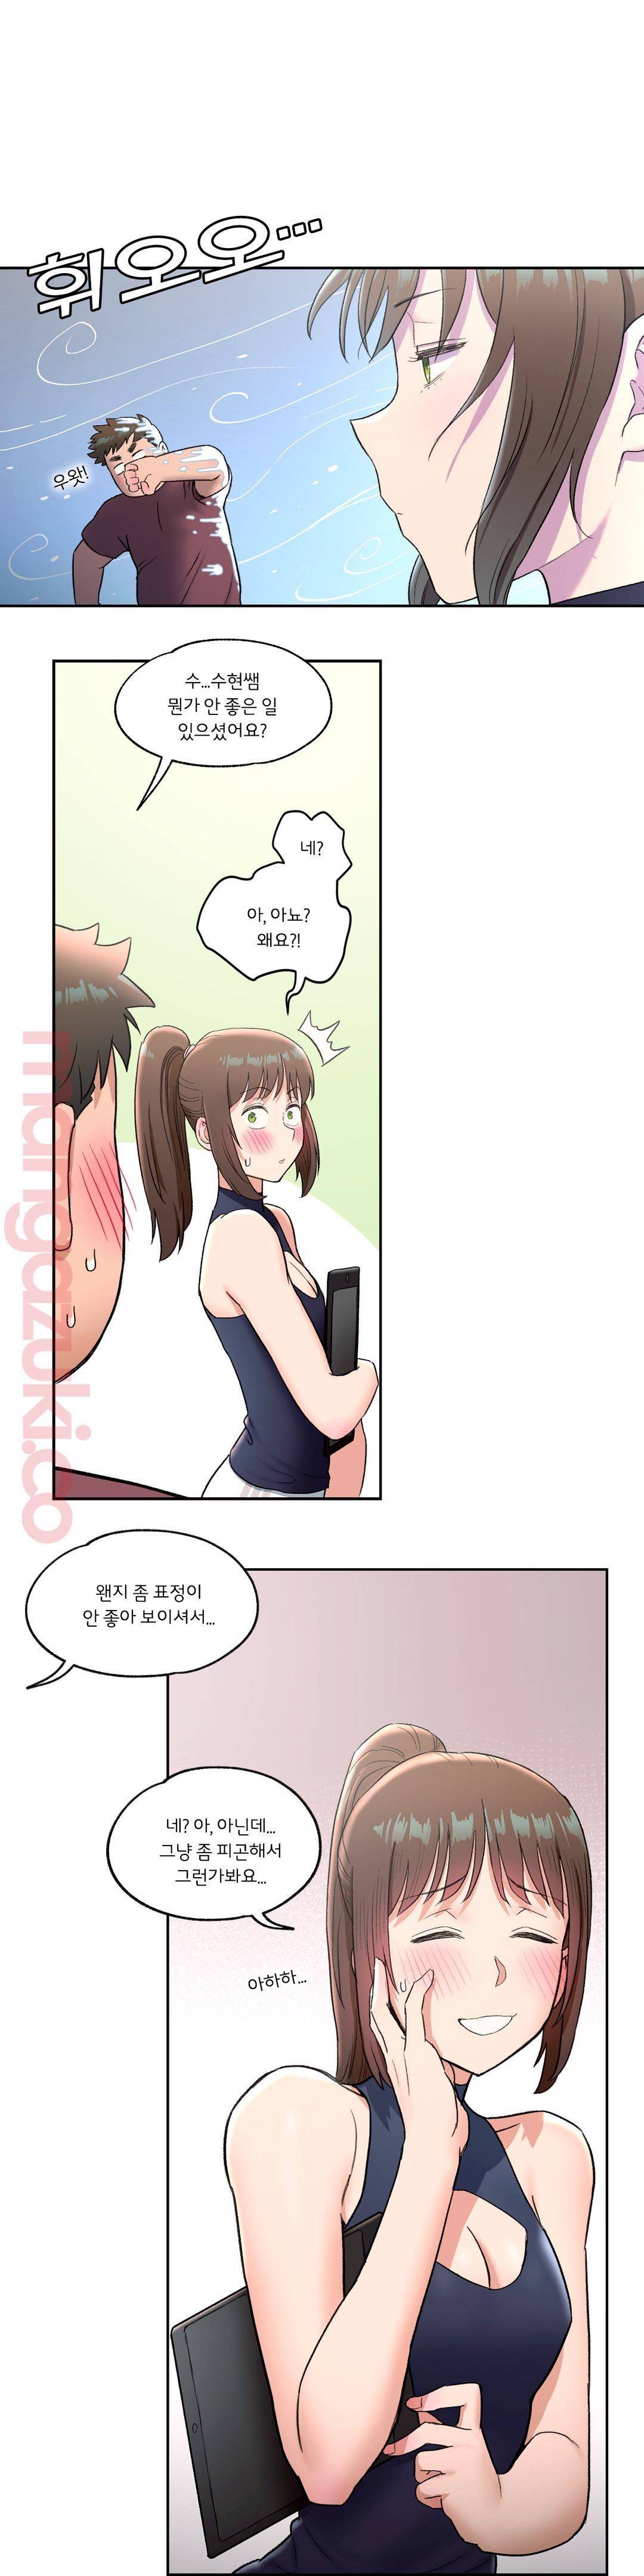 Sexercise Raw - Chapter 41 Page 11